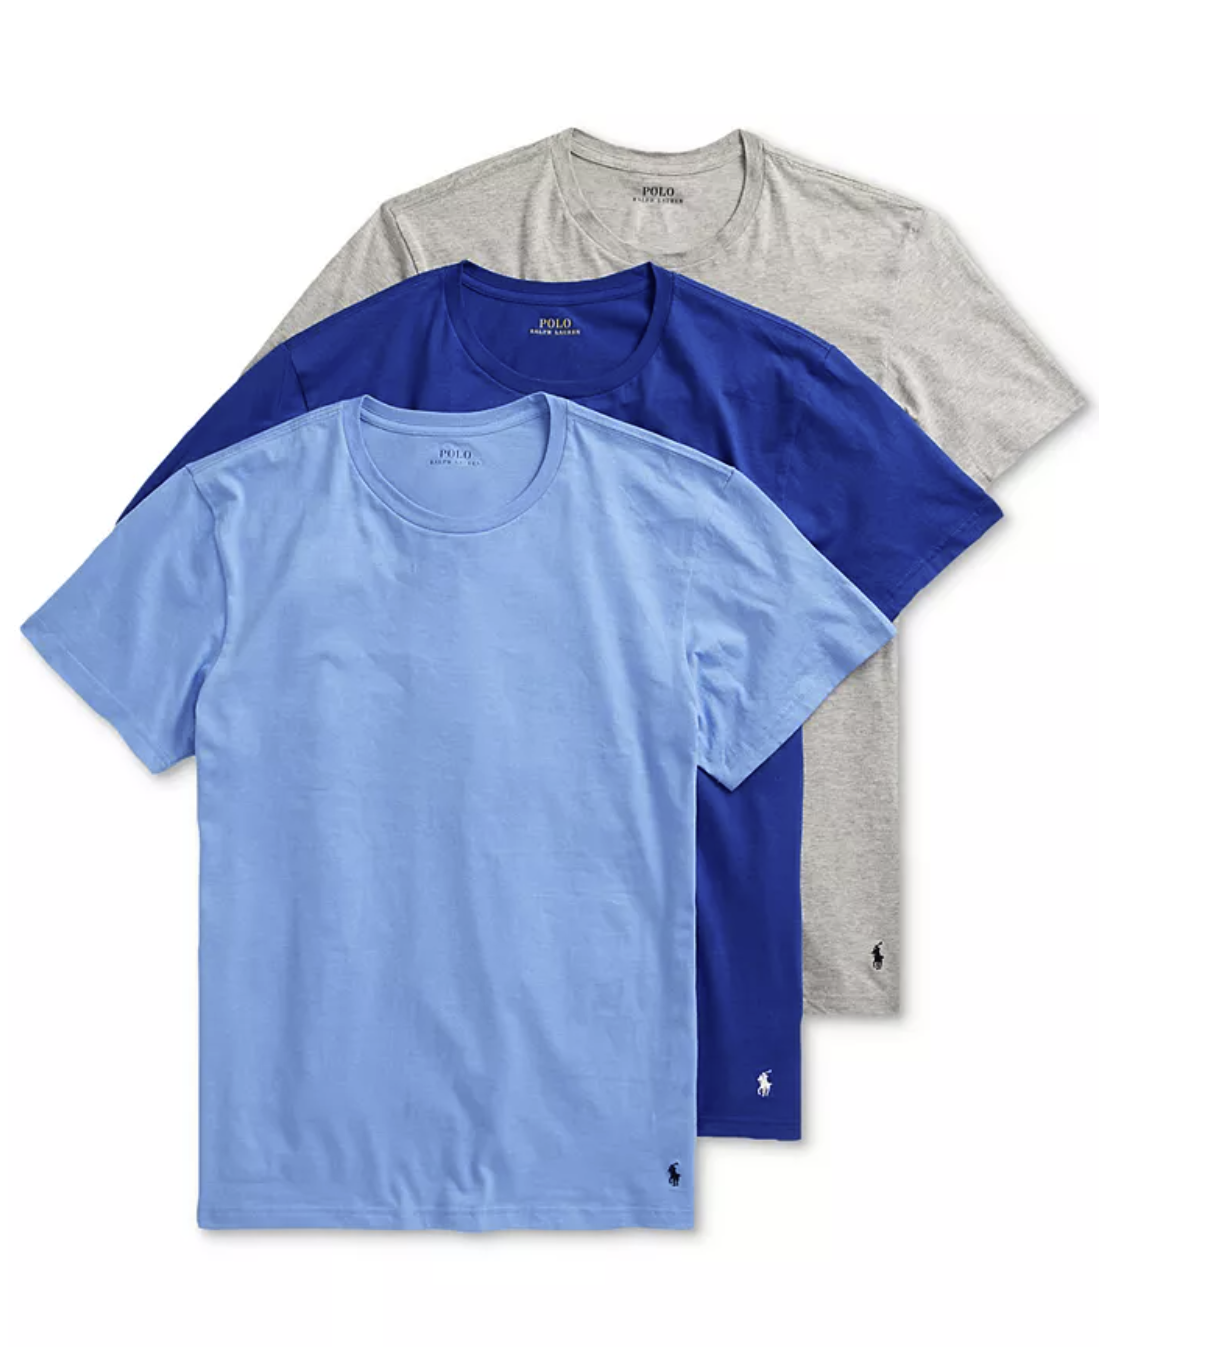 60% OFF Polo Ralph Lauren Classic Undershirts (3-Pack) — Sneaker Shouts